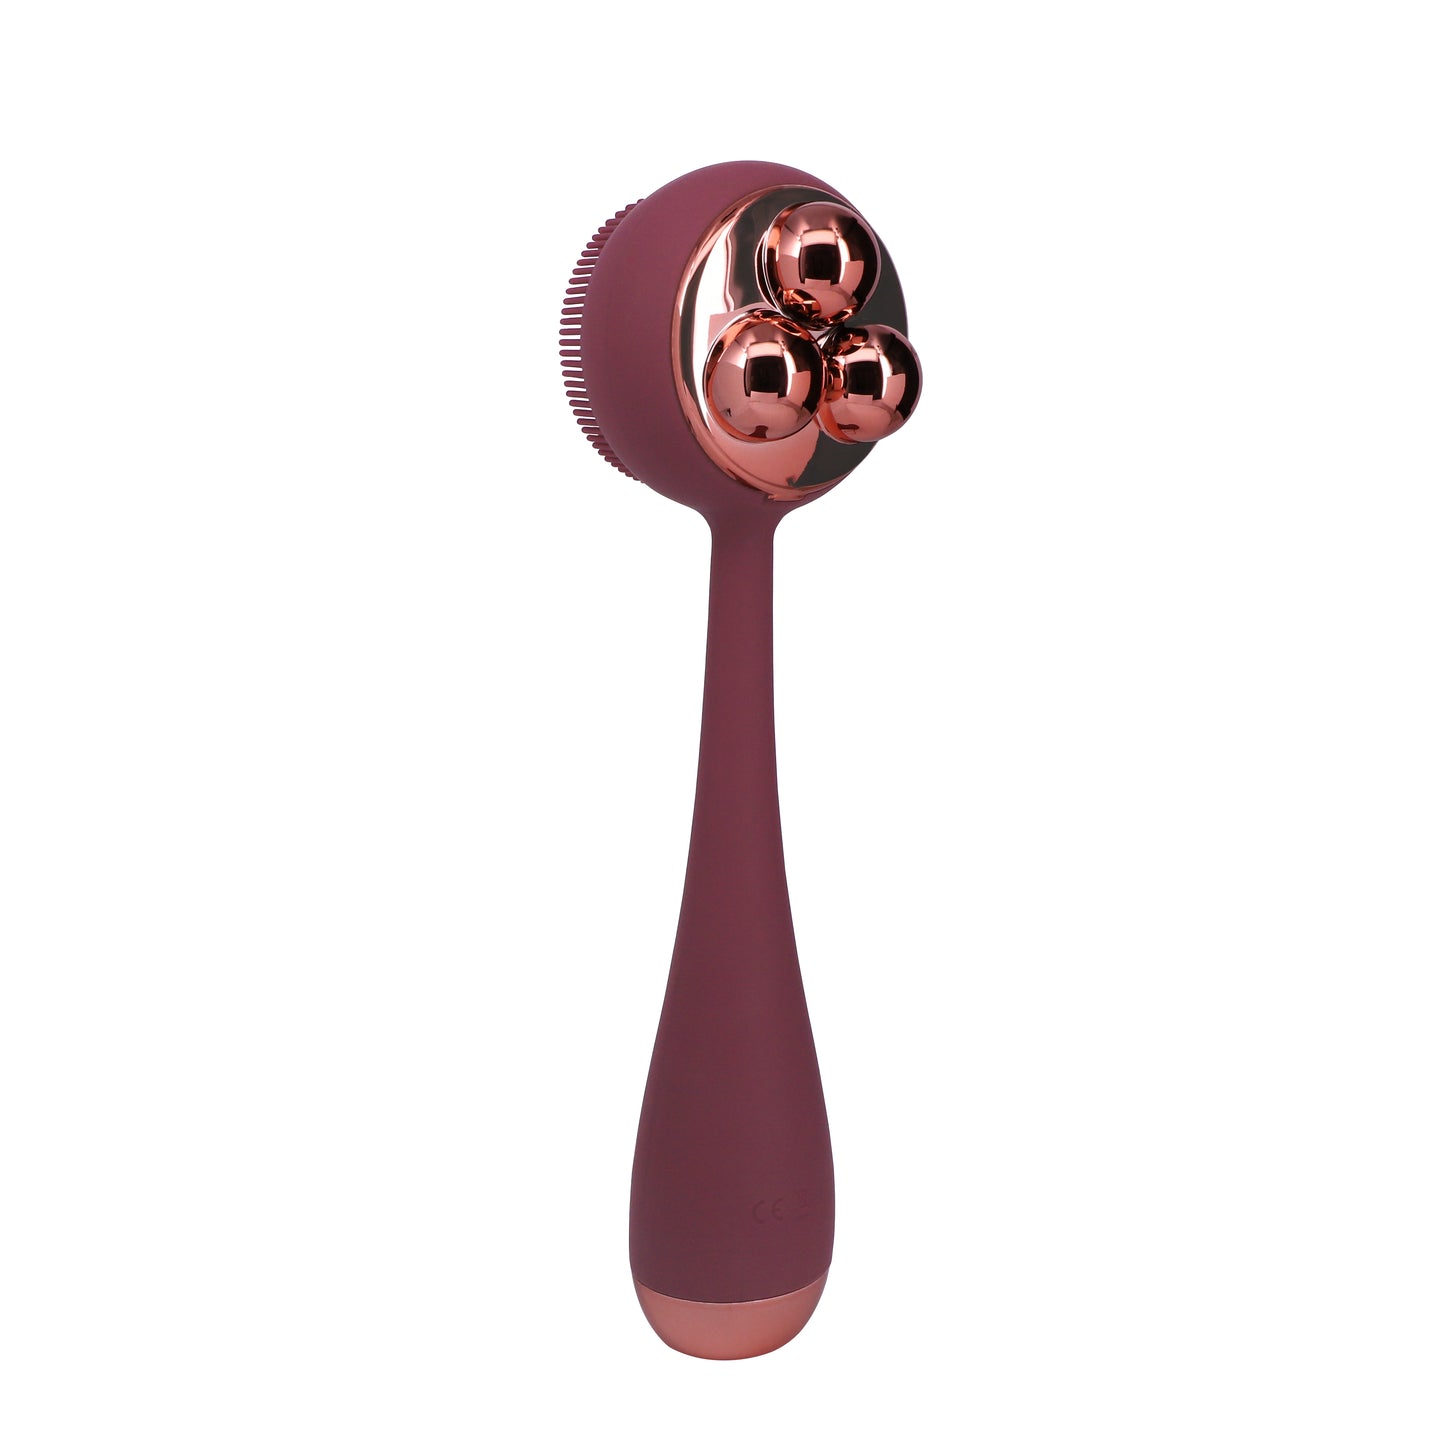 AT-4003-MBerry?PMD Clean Body in berry featuring massager attachment